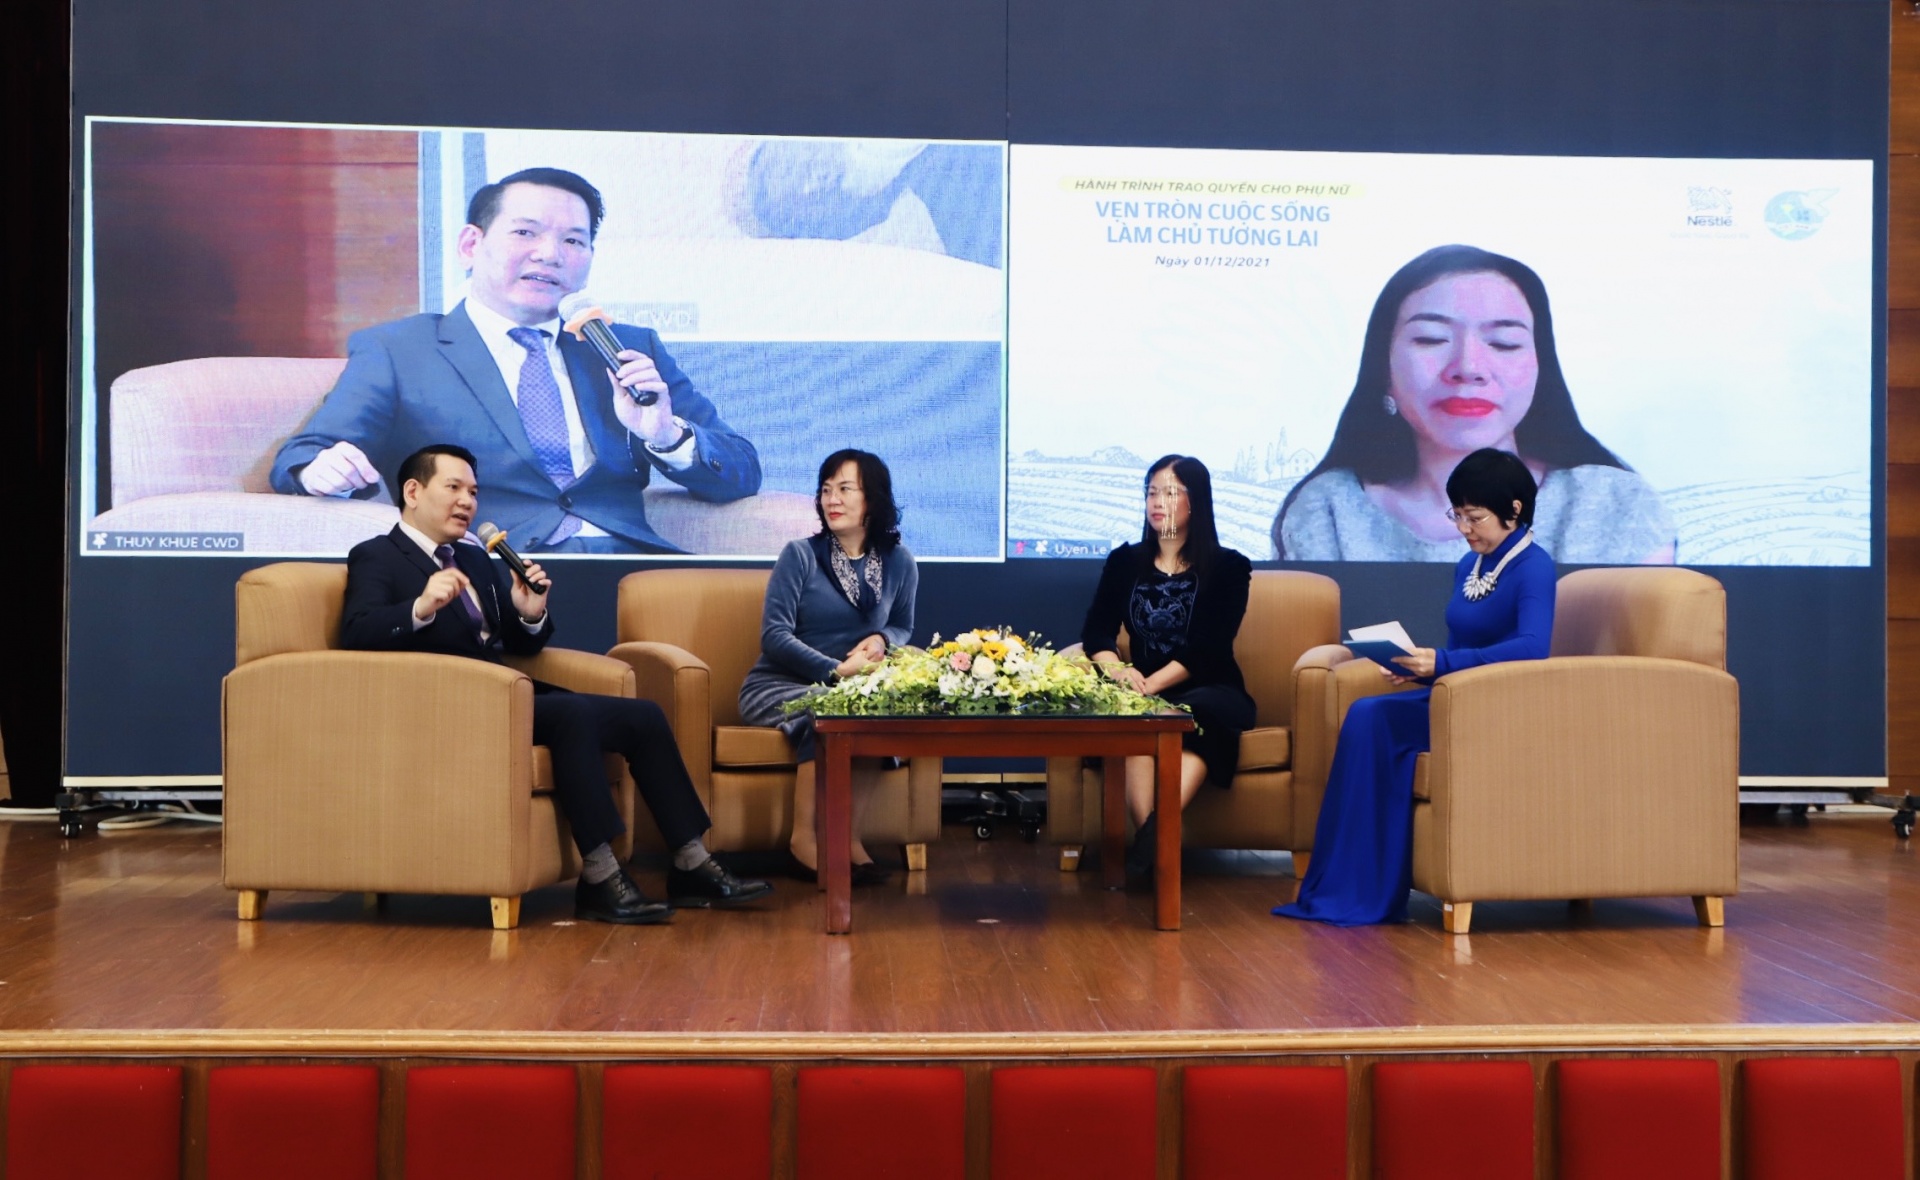 “Women’s Empowerment Journey: “Complete Life – Own the Future” is the topic of a talk held by the Vietnam Women’s Union and Nestlé Vietnam on December 1